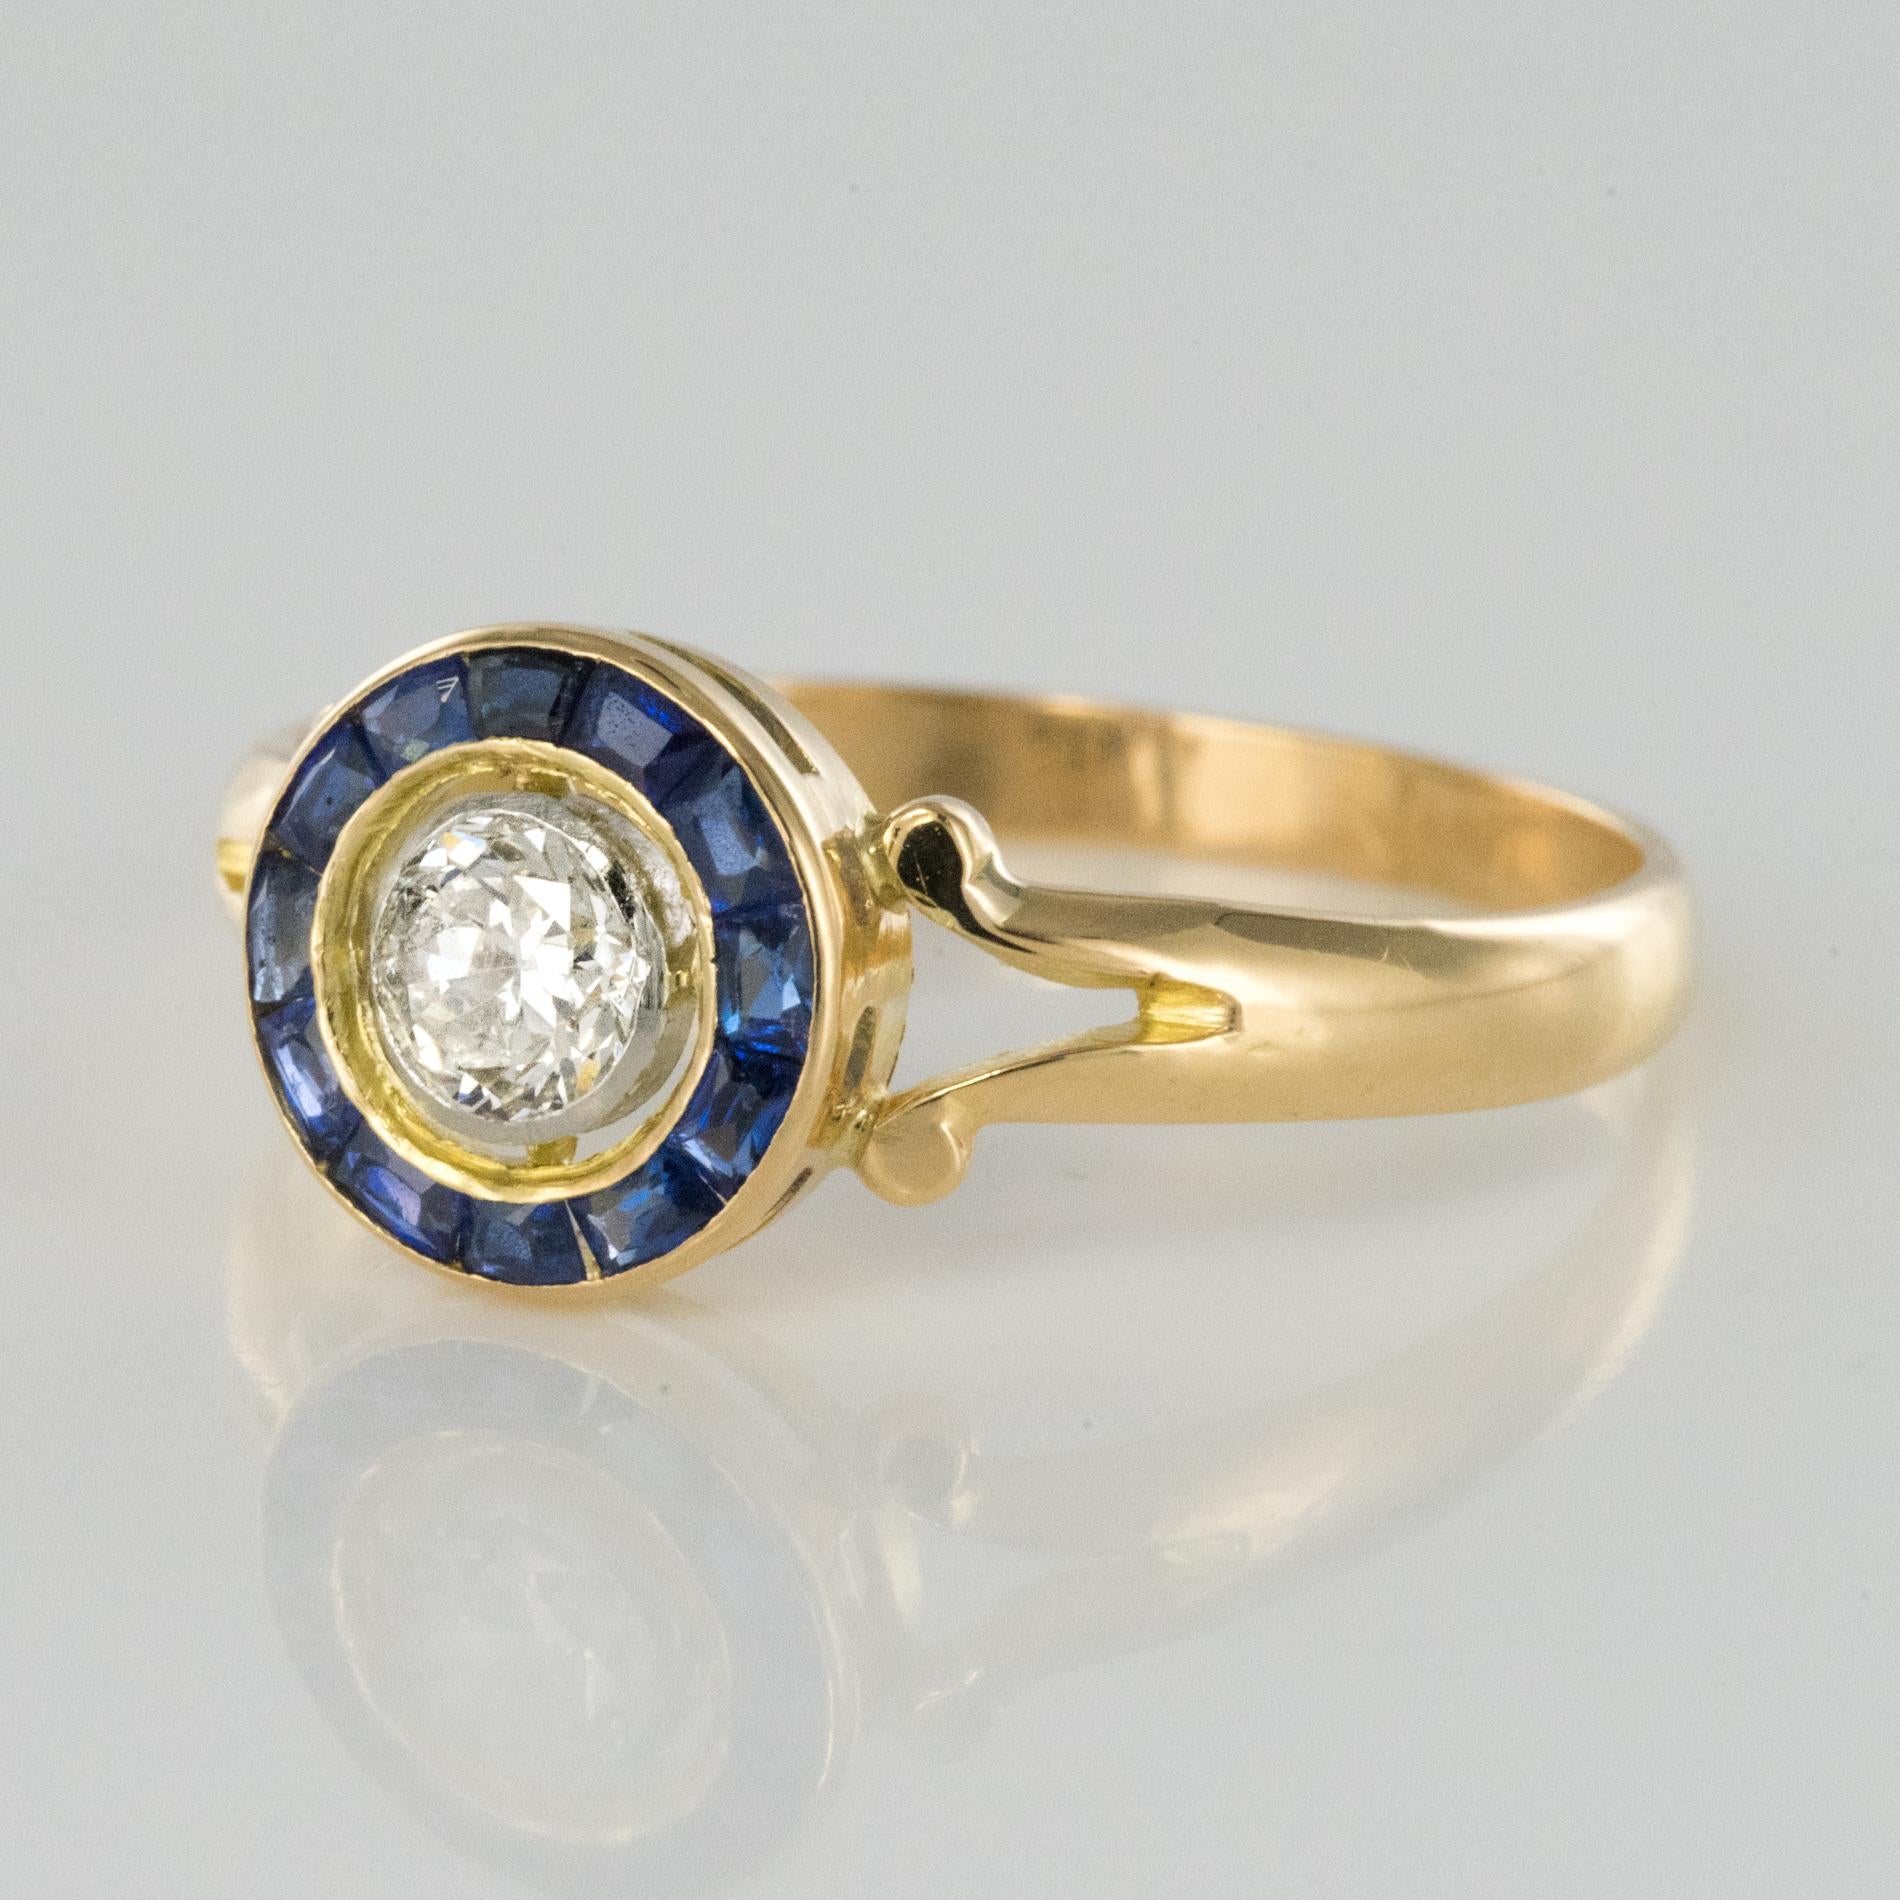 Belle Époque French 1920s Calibrated Sapphires Diamond Yellow Gold Ring